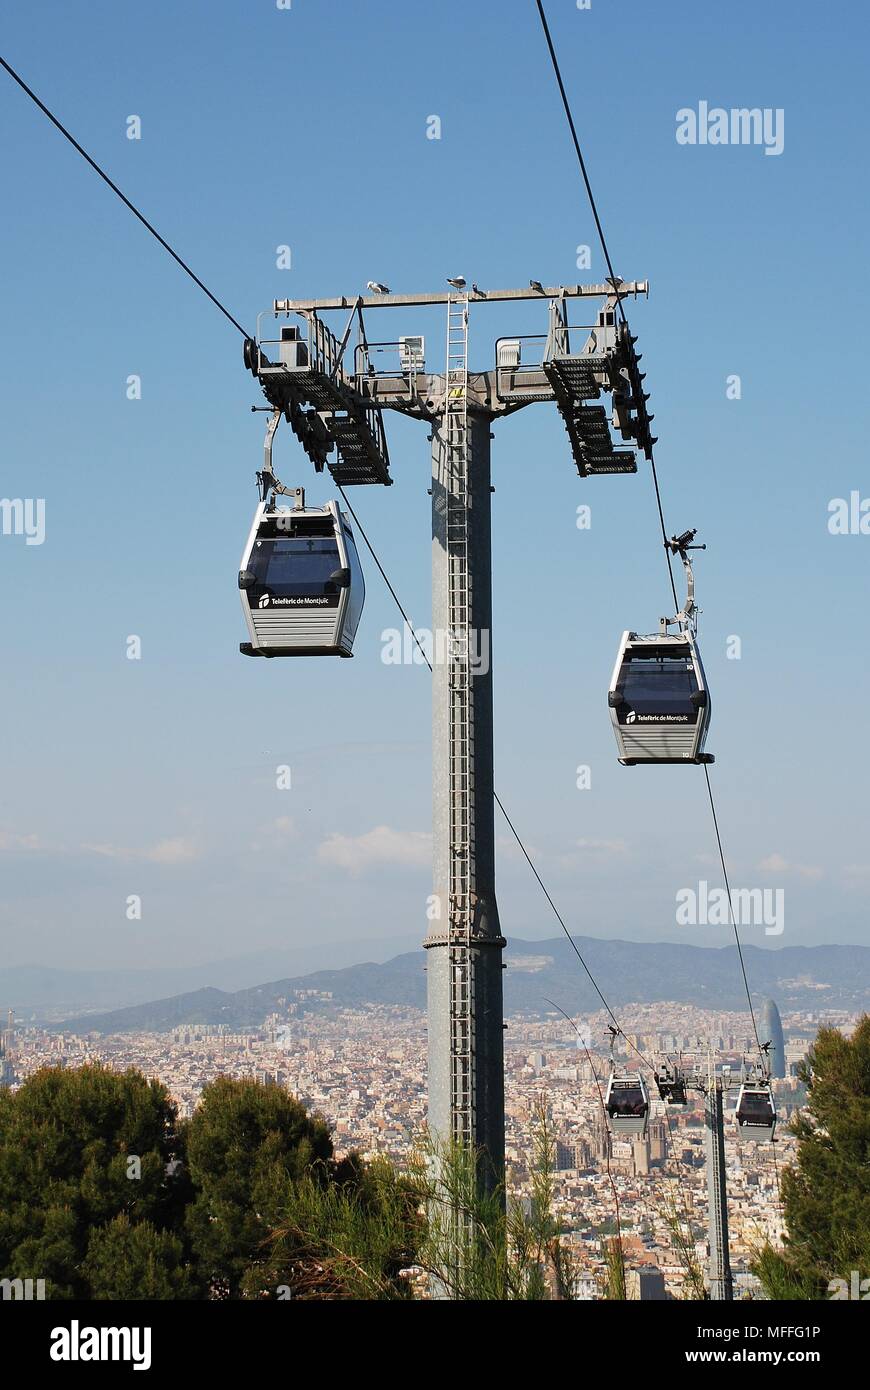 The Teleferic cable car line at Montjuic hill in Barcelona, Spain on April 19, 2018. With 55 cars, the 750 metre route opened in May 2007. Stock Photo